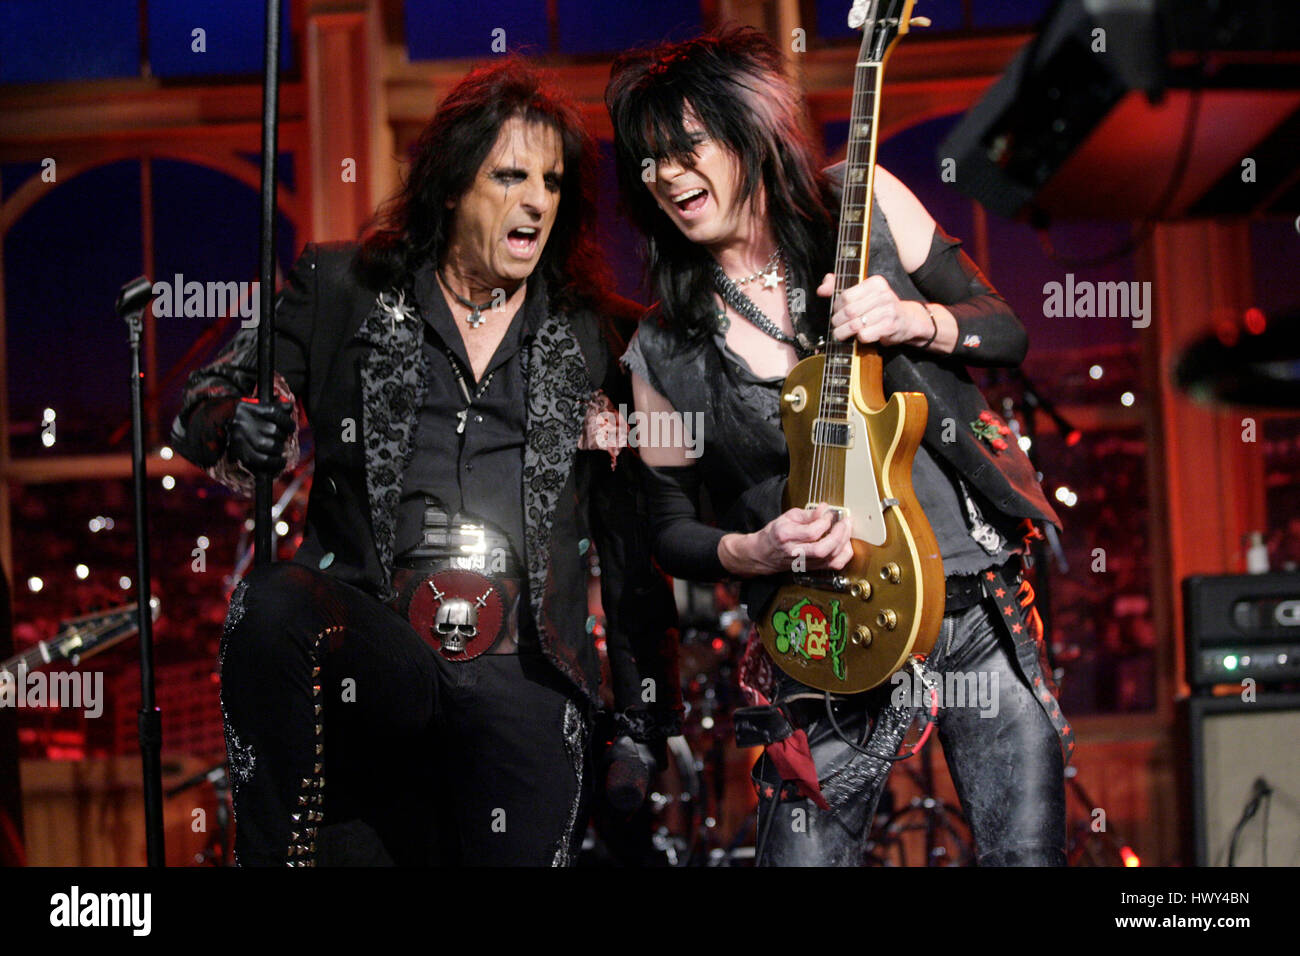 Alice Cooper during a segment of 'The Late Late Show with Craig Ferguson' at CBS Television City on Sept.10, 2008 in Los Angeles, California. Photo by Francis Specker Stock Photo